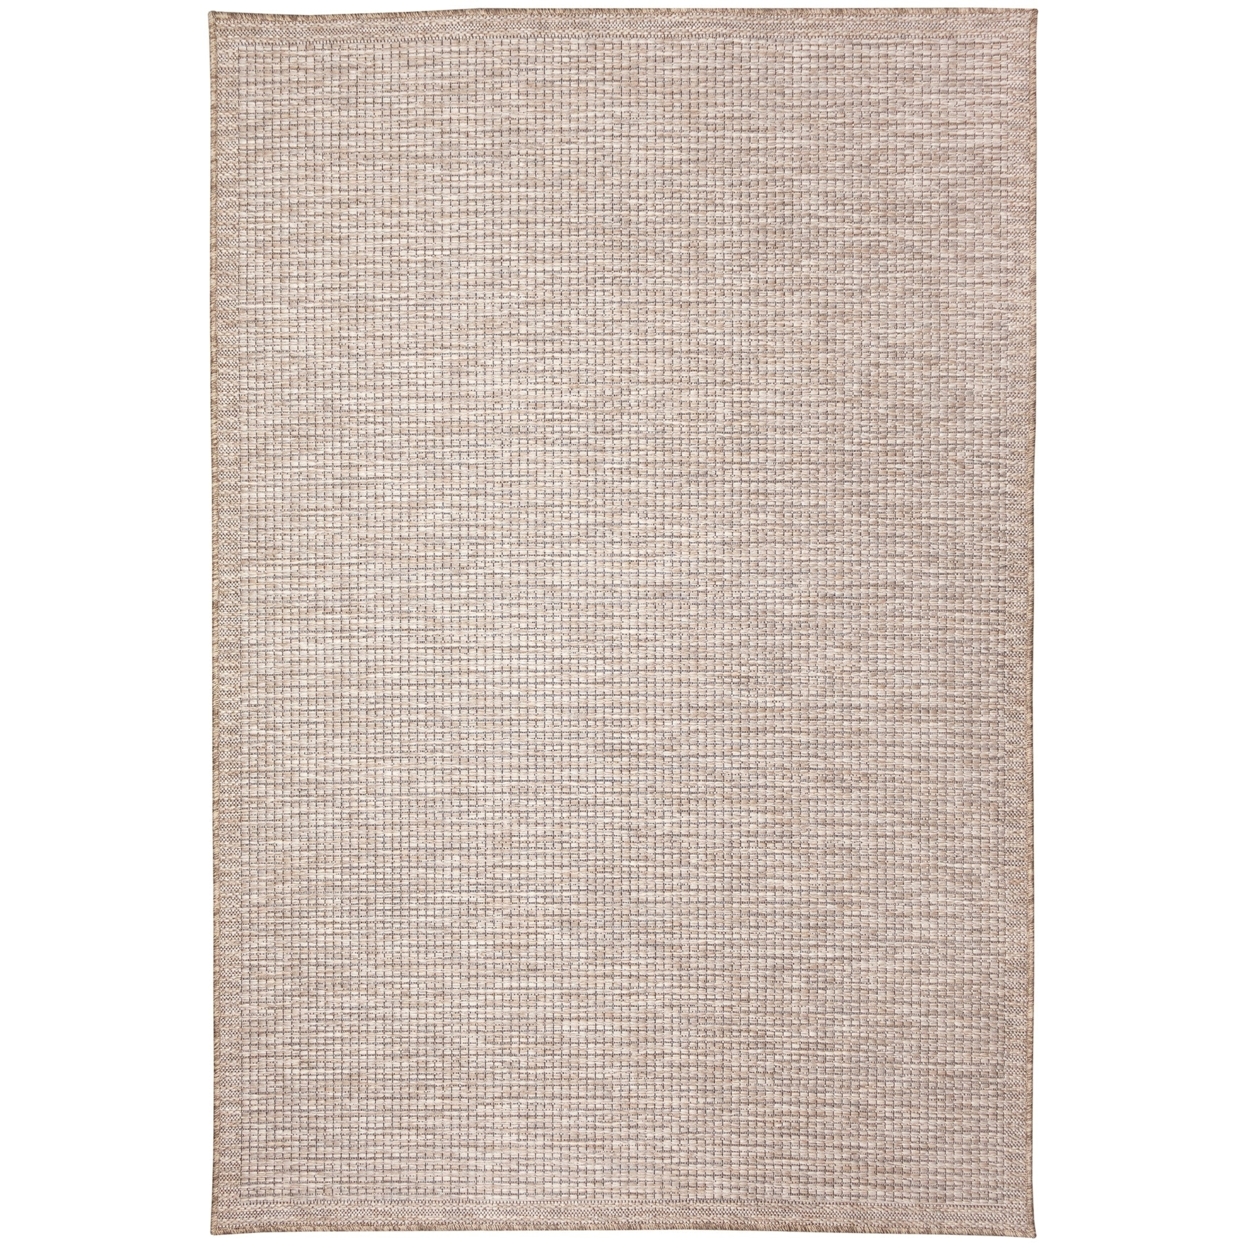 Liora Manne Orly Texture Indoor Outdoor Area Rug Natural - 3'3 X 4'11